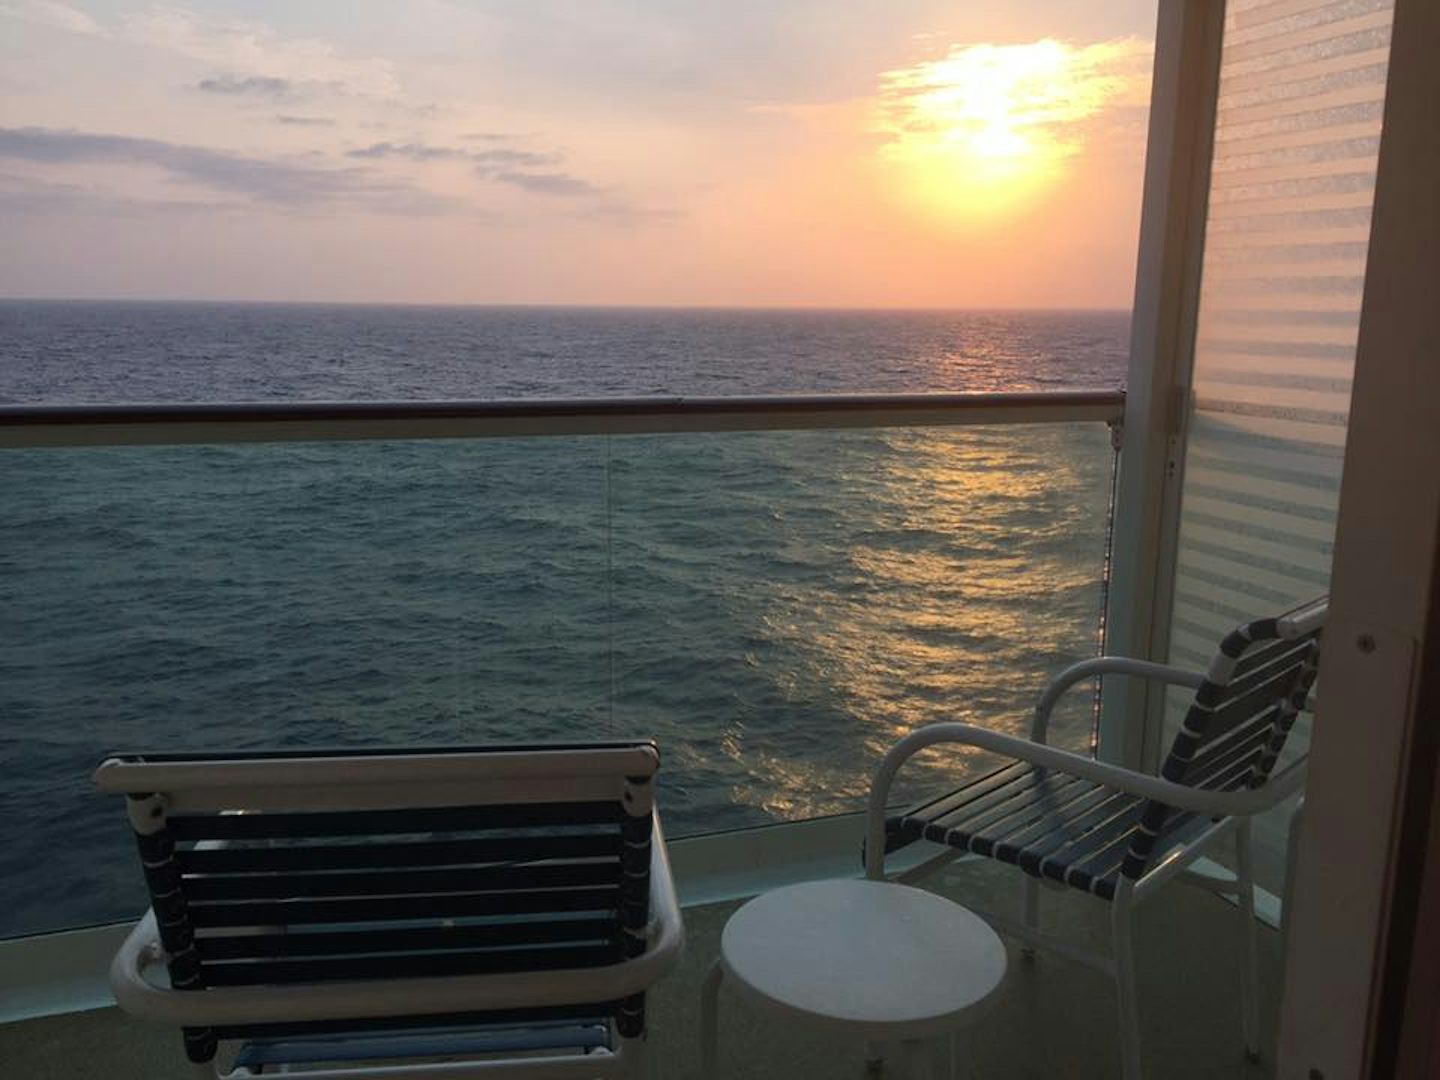 Our balcony at sunset at sea. :)